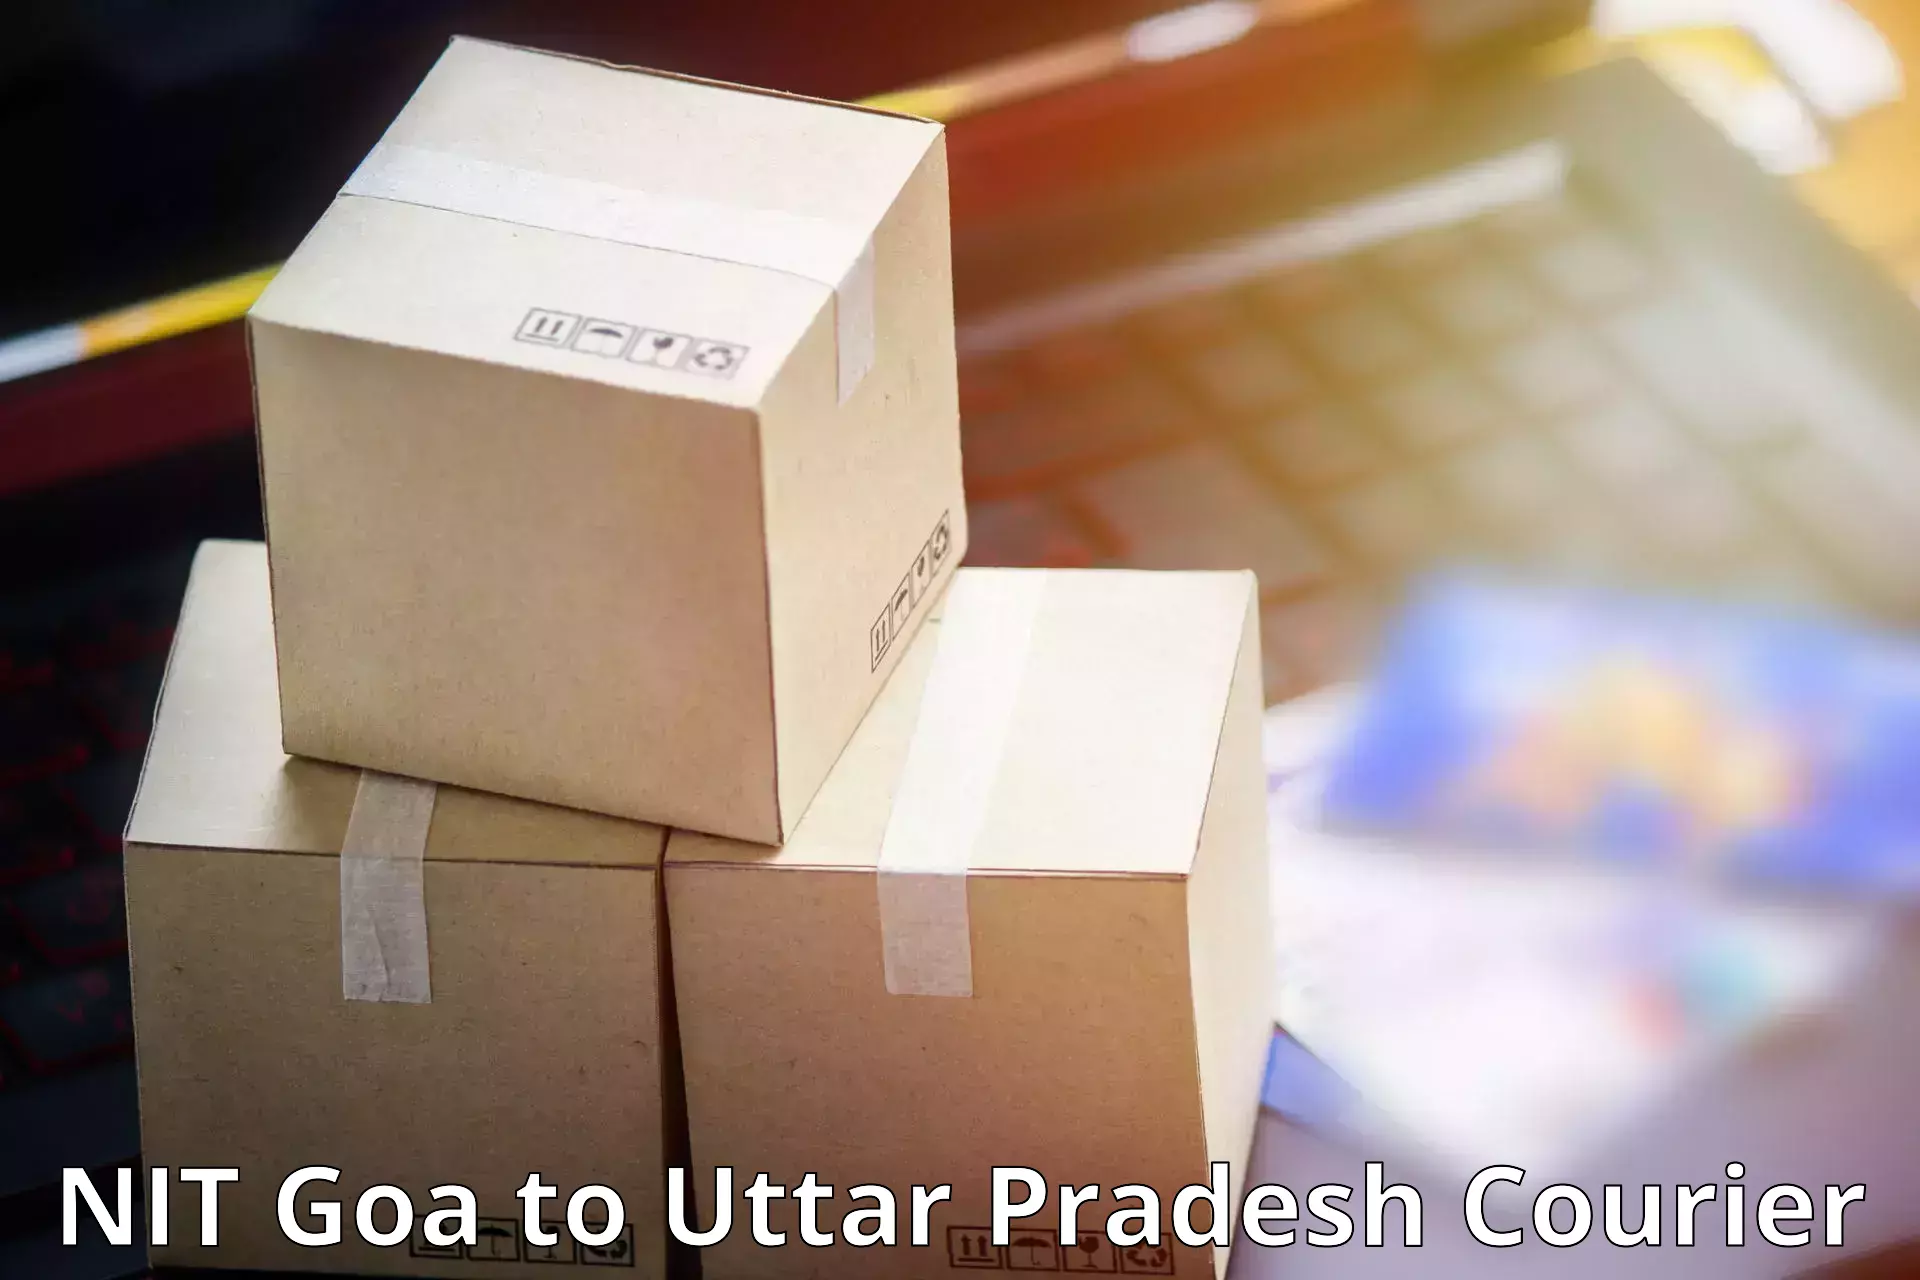 Parcel service for businesses NIT Goa to Jalalabad Shahjahanpur